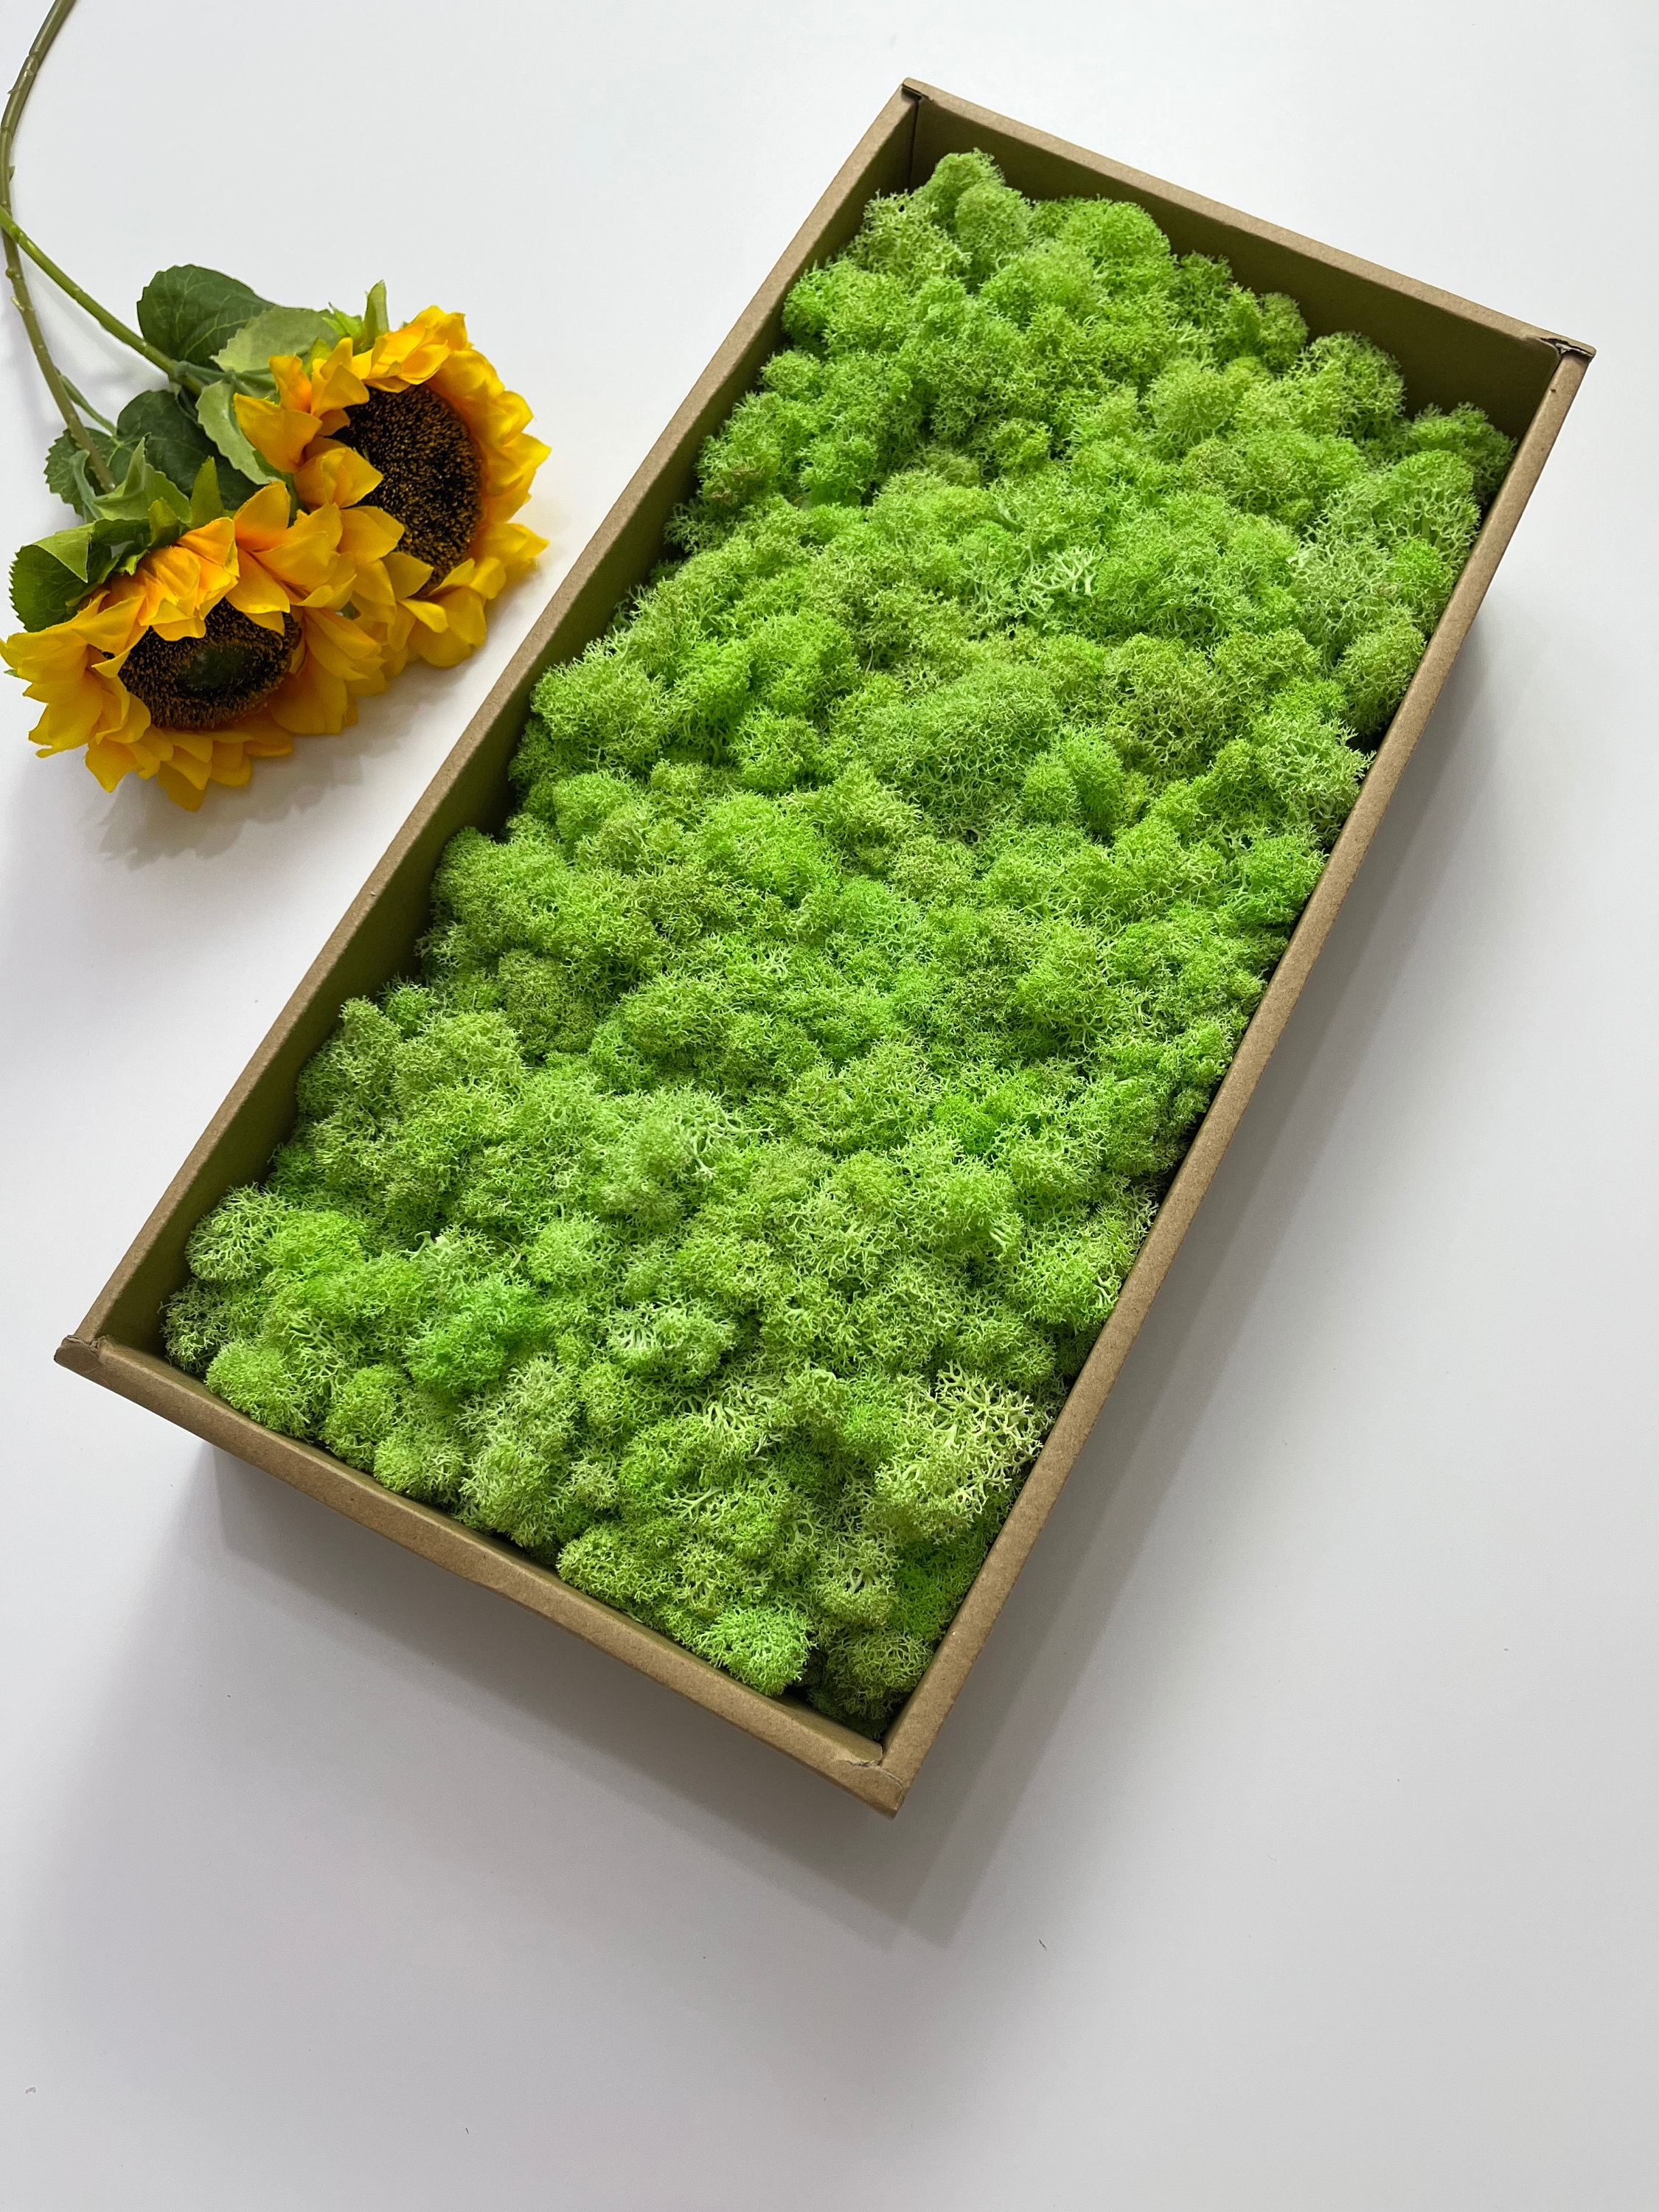 10OZ Fake Moss Artificial Moss for Potted Plants Greenery Moss Home Decor